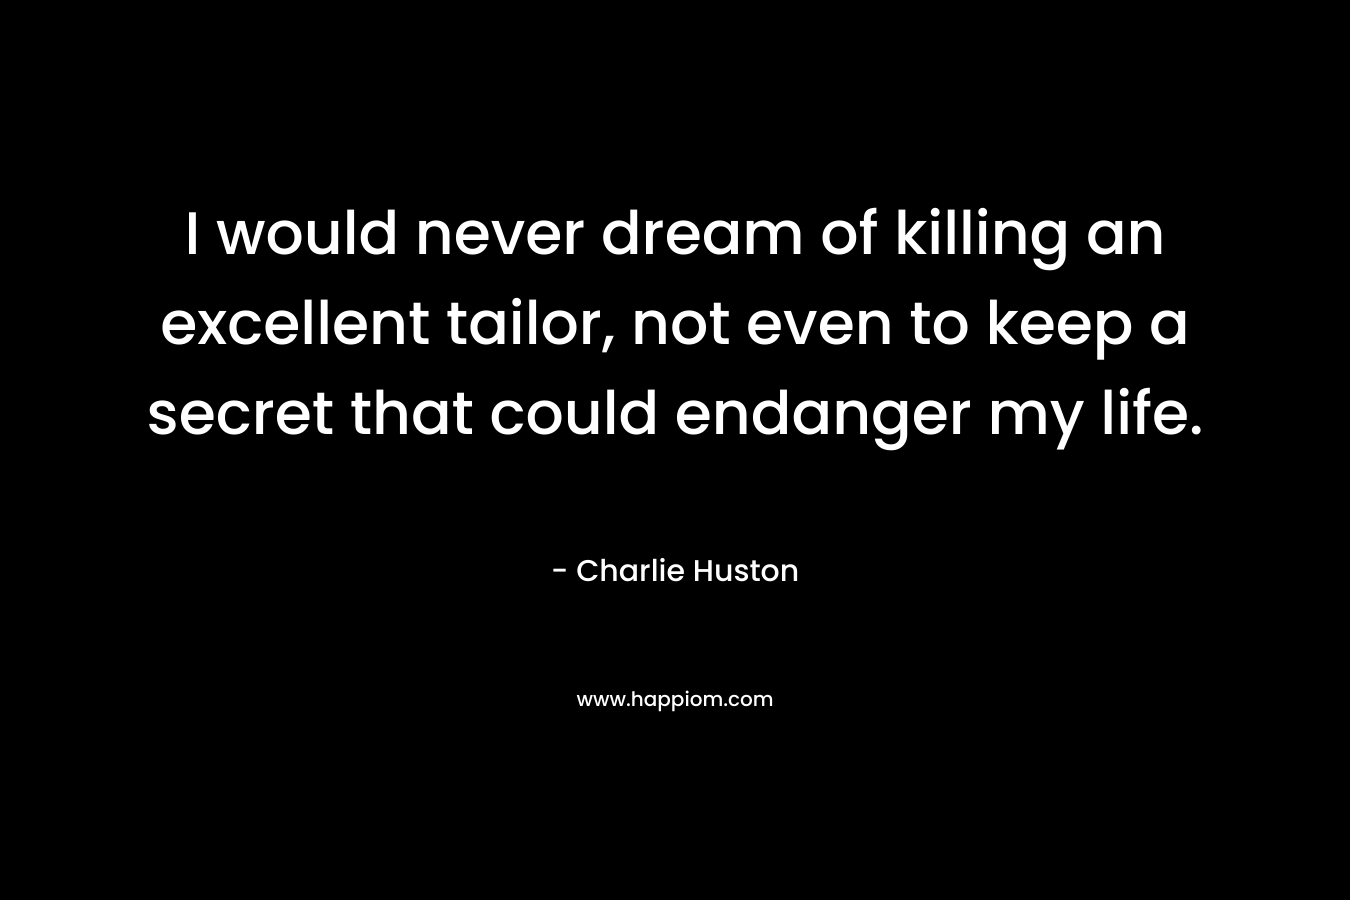 I would never dream of killing an excellent tailor, not even to keep a secret that could endanger my life. – Charlie Huston